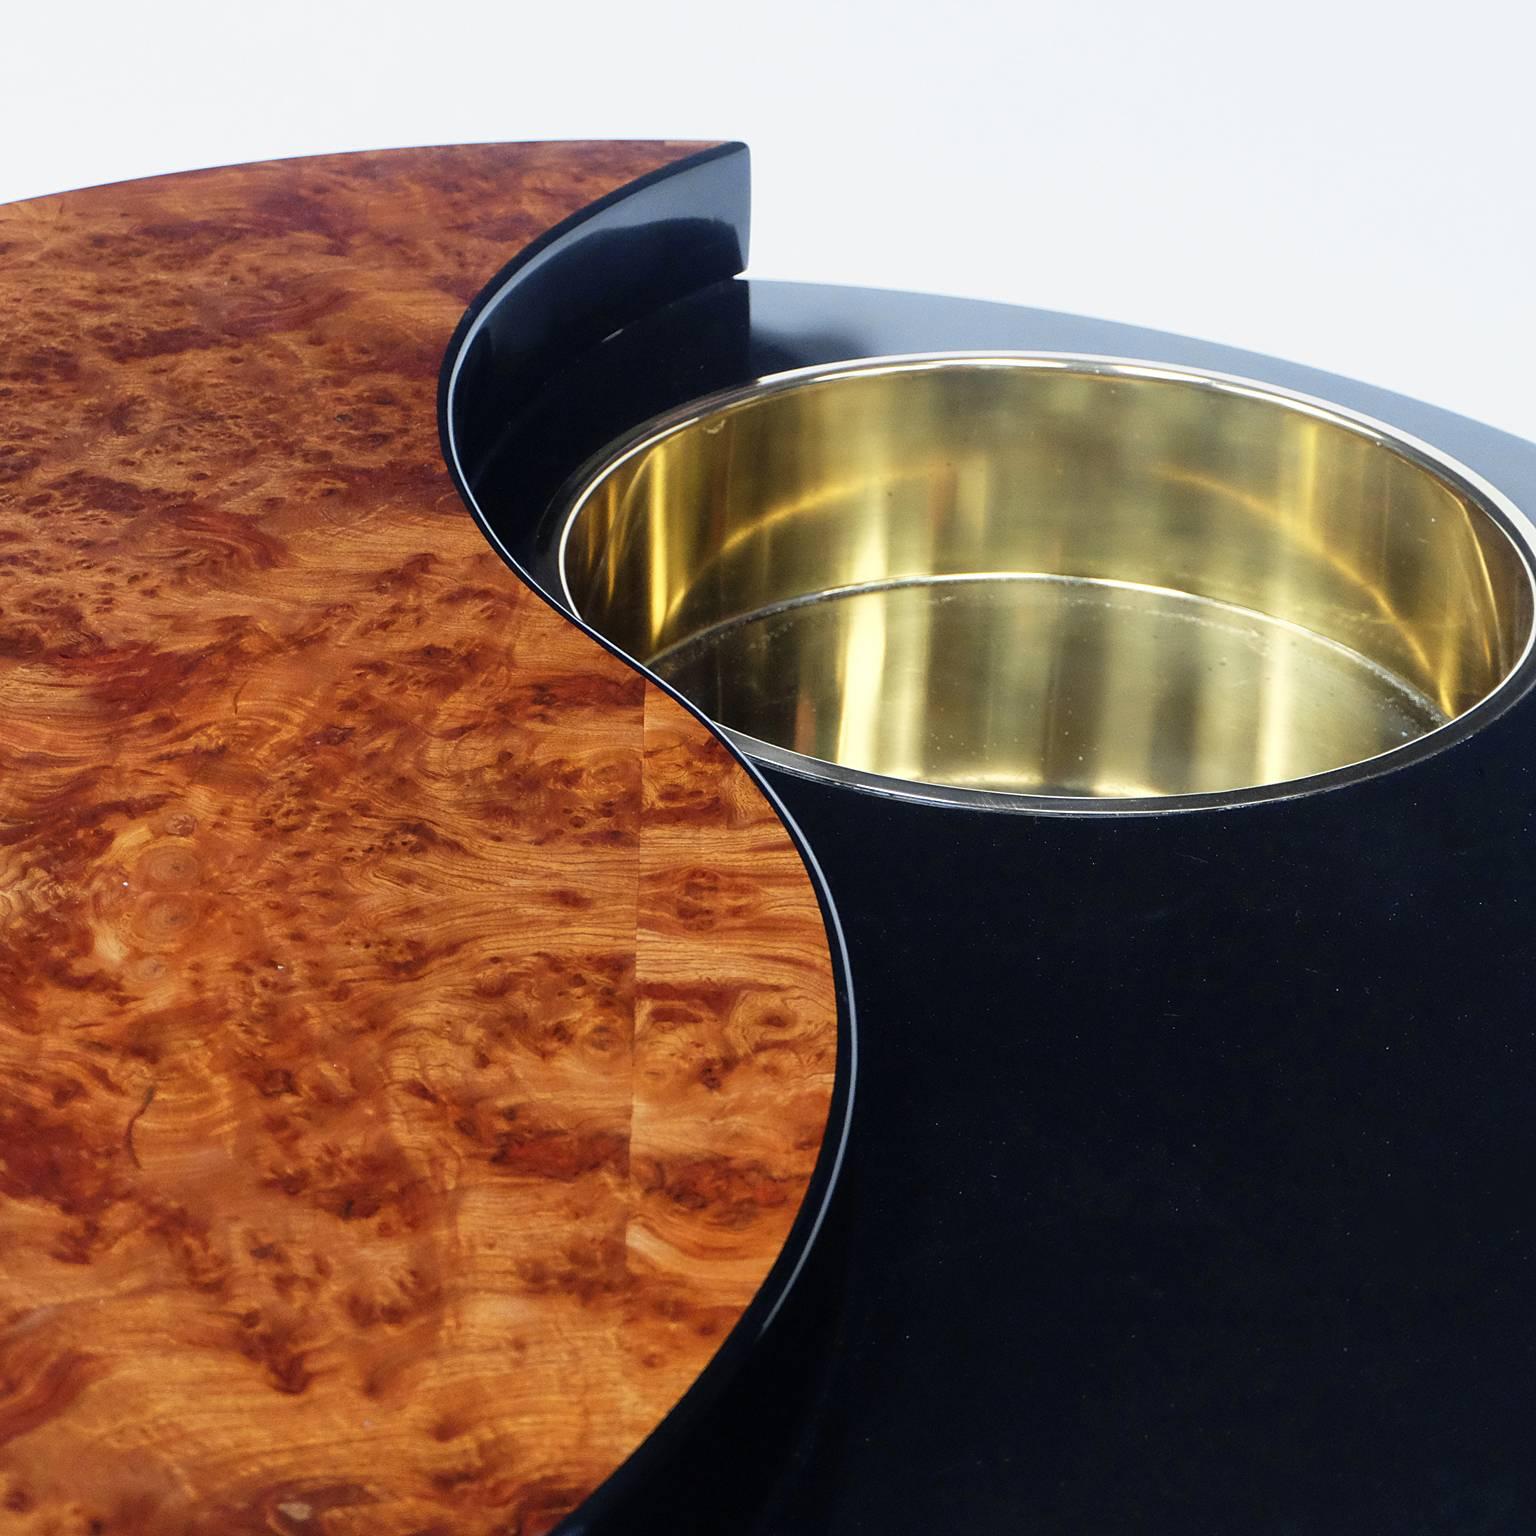 1970s rotating coffee table designed by Willy Rizzo, Italy.

Black lacquered unit with burr walnut inlay. Fixed brass circular insert.

Black laminate plinth.

Measures: H 39cm x L 107cm x W 107cm.